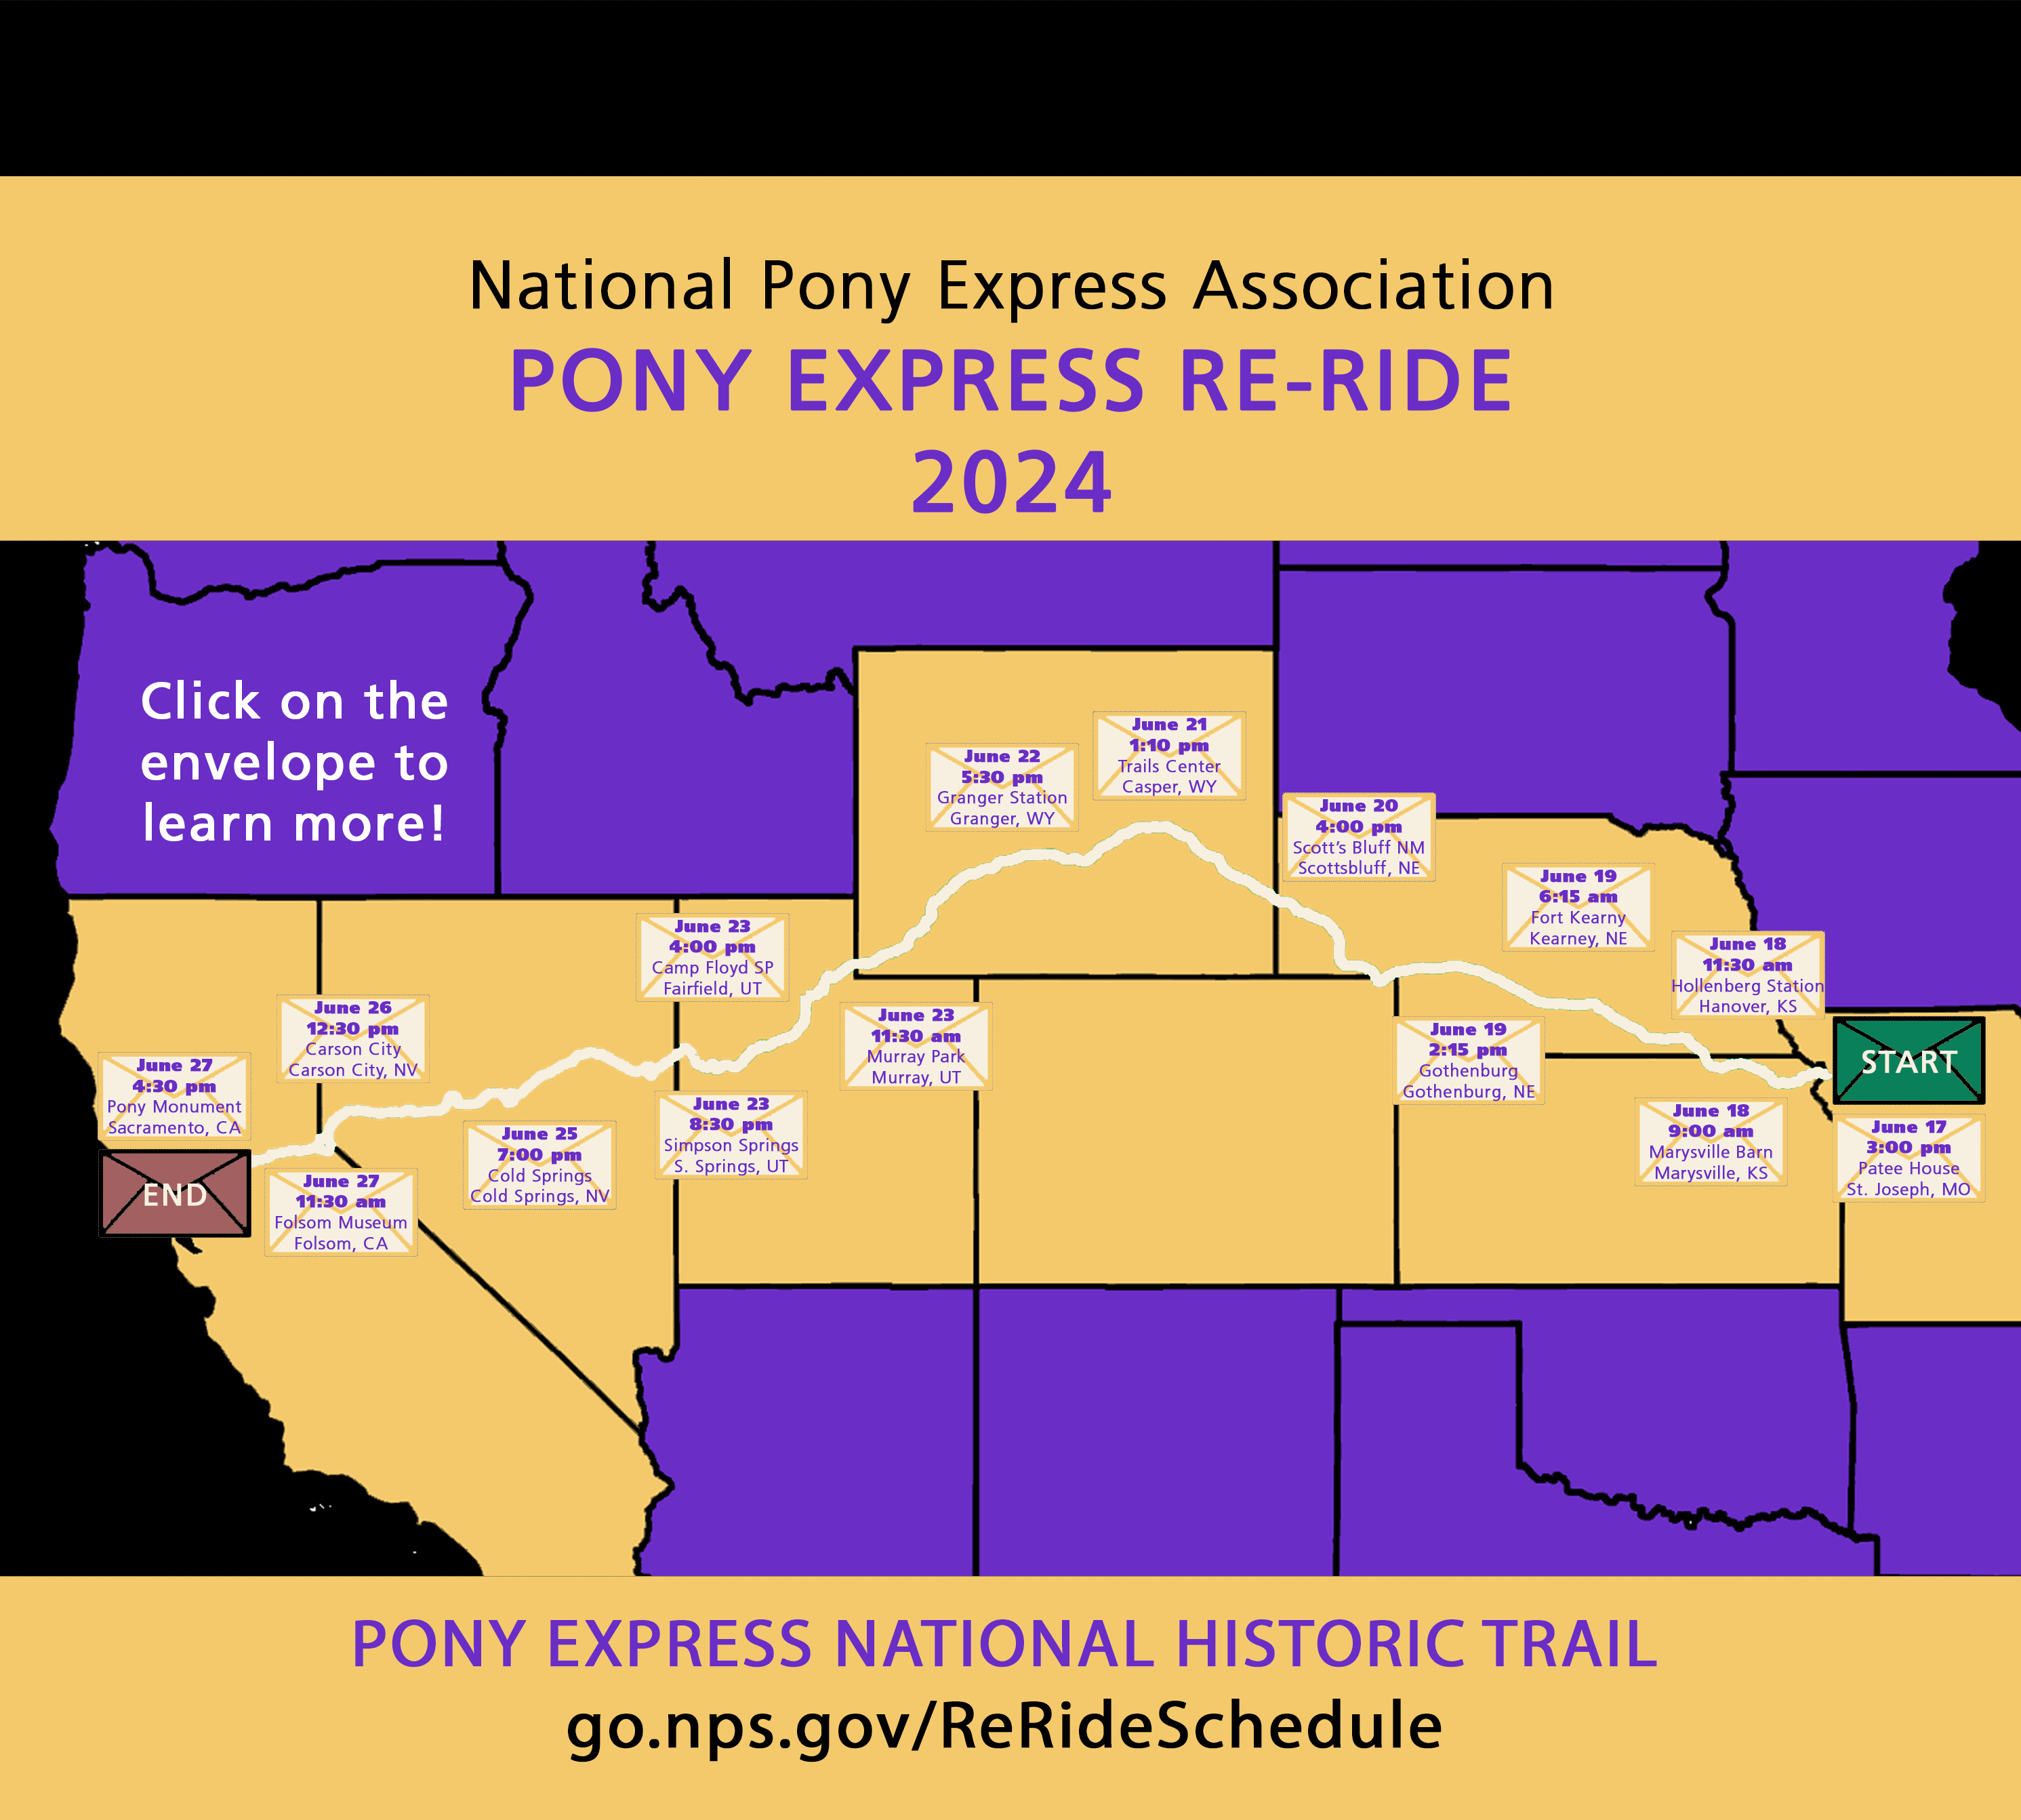 See the Pony Express Re-Ride (U.S. National Park Service)